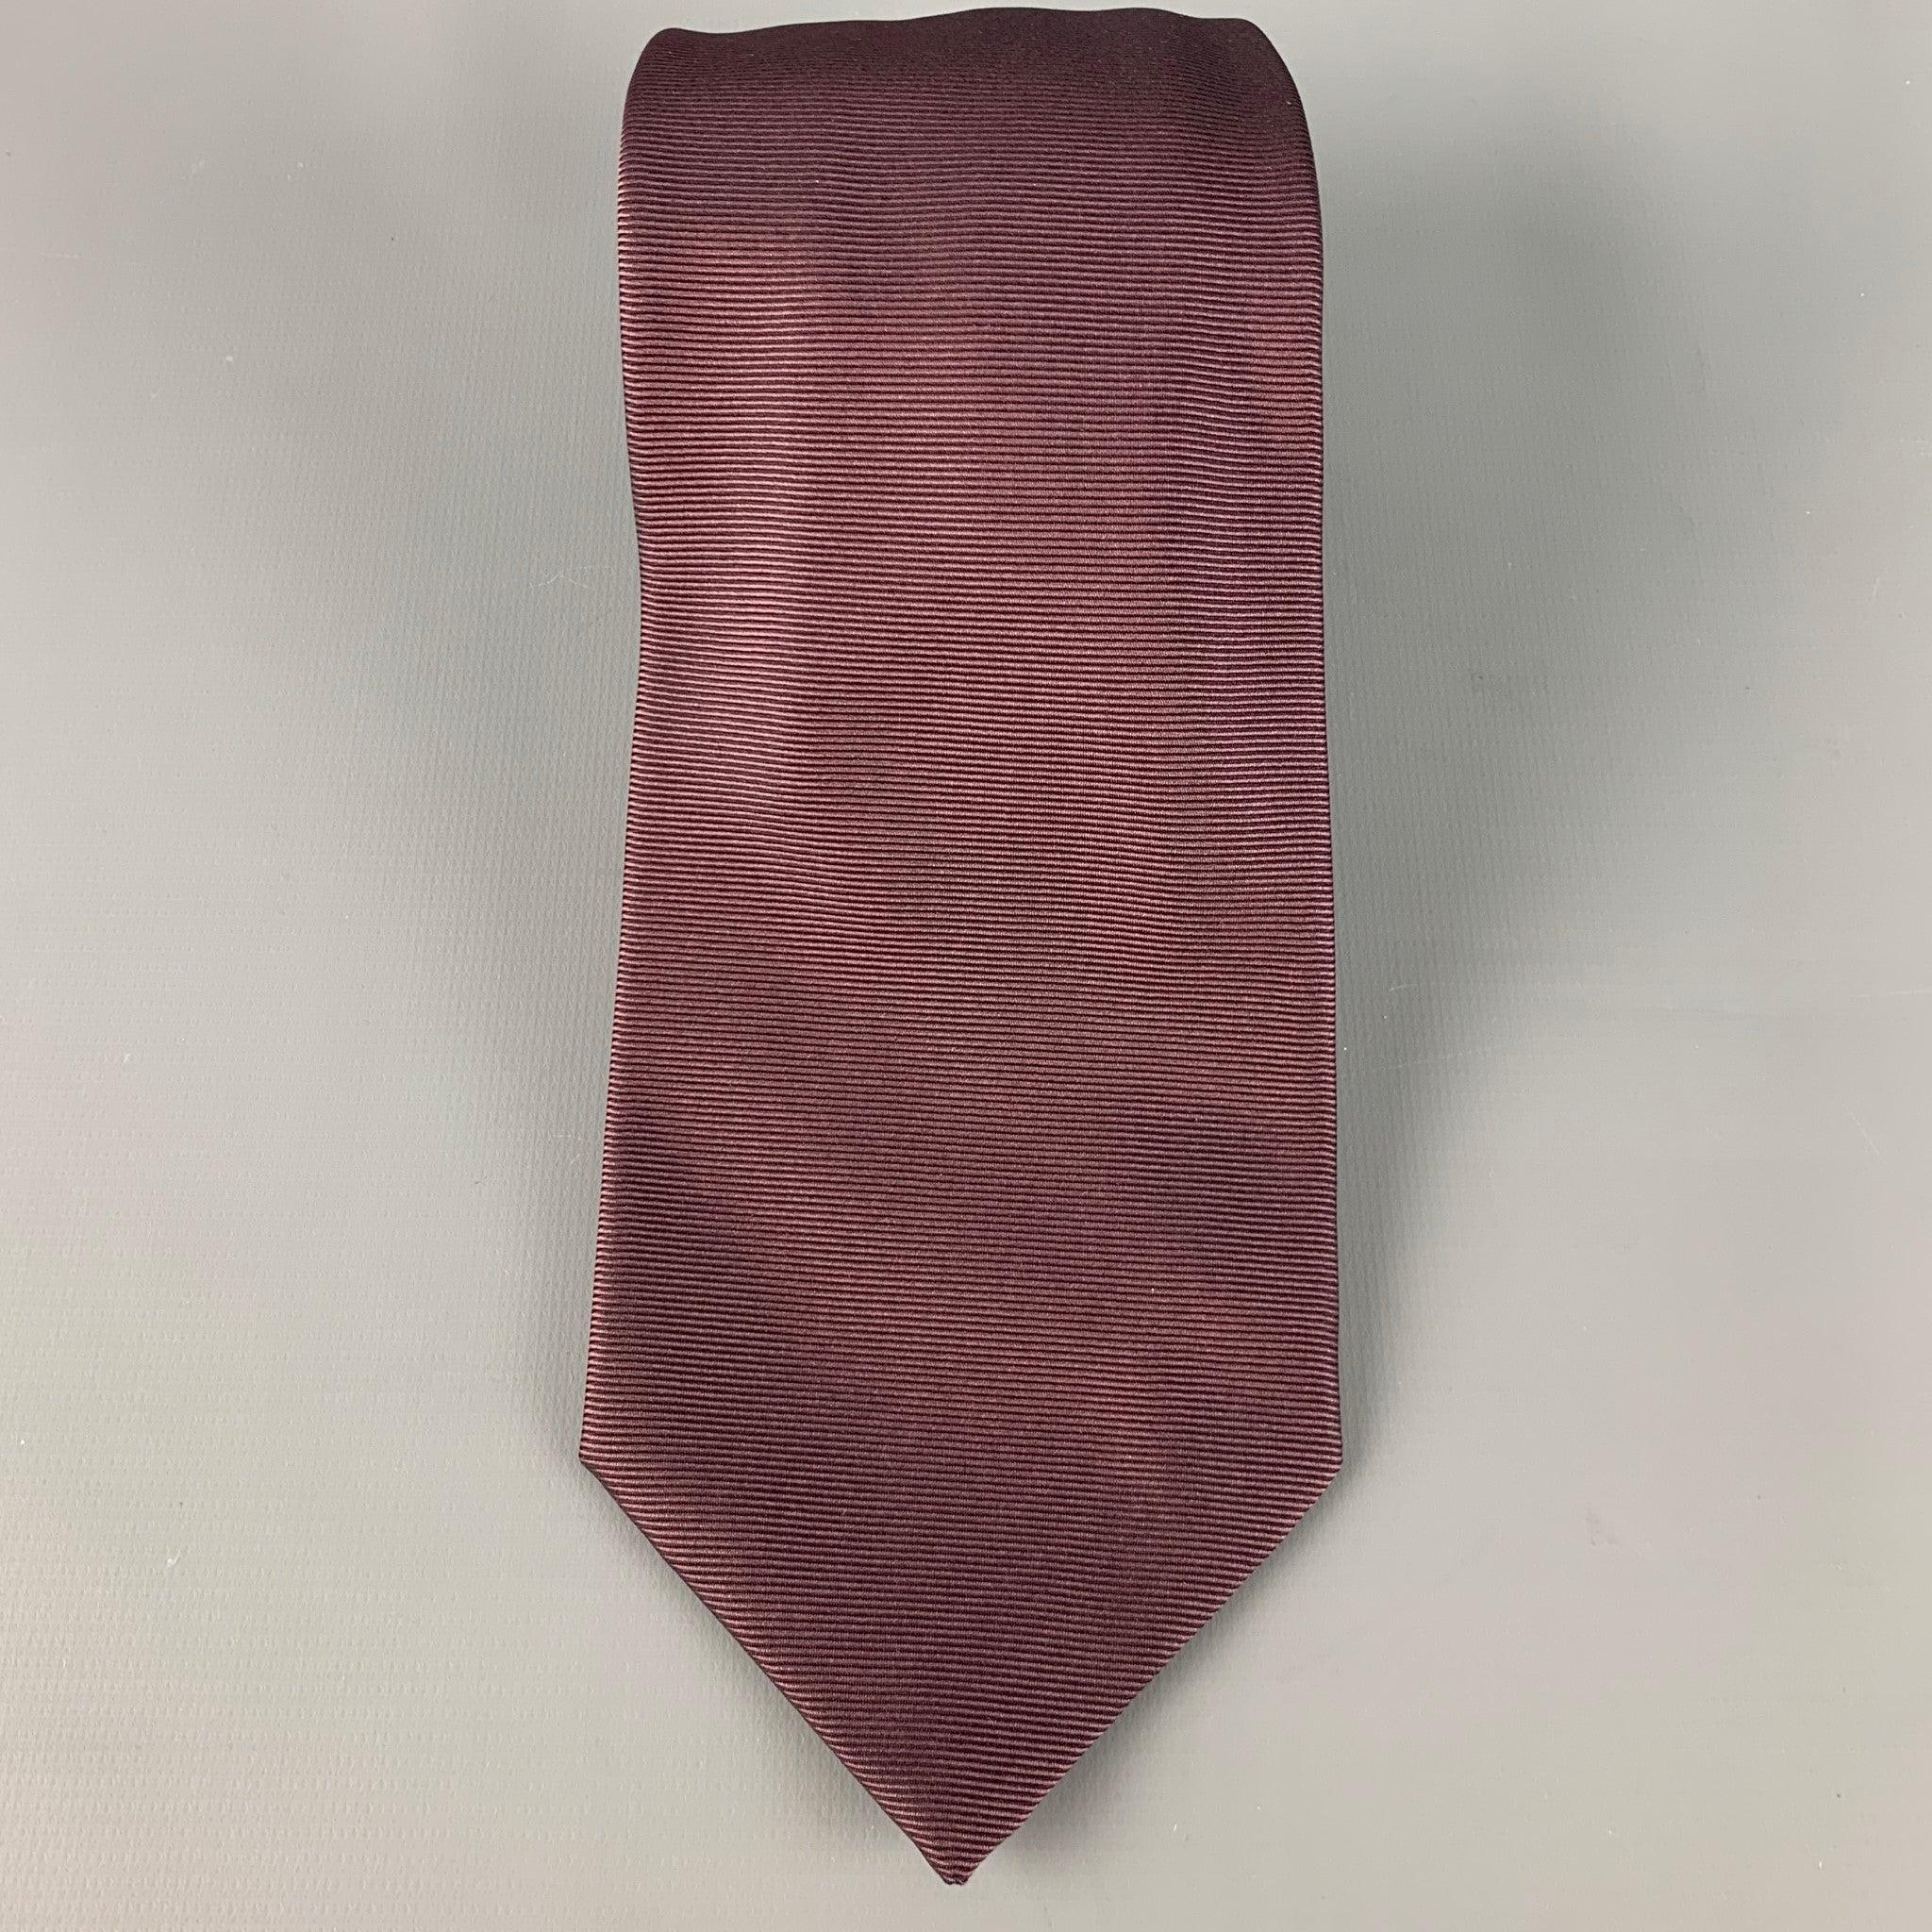 ENRICO ISAIA
tie in a brown silk twill. Handmade in Italy.Very Good Pre-Owned Condition. 

Measurements: 
  Width: 3.5 inches Length: 60 inches 
  
  
 
Reference: 126558
Category: Tie
More Details
    
Brand:  ISAIA
Color:  Brown
Fabric: 